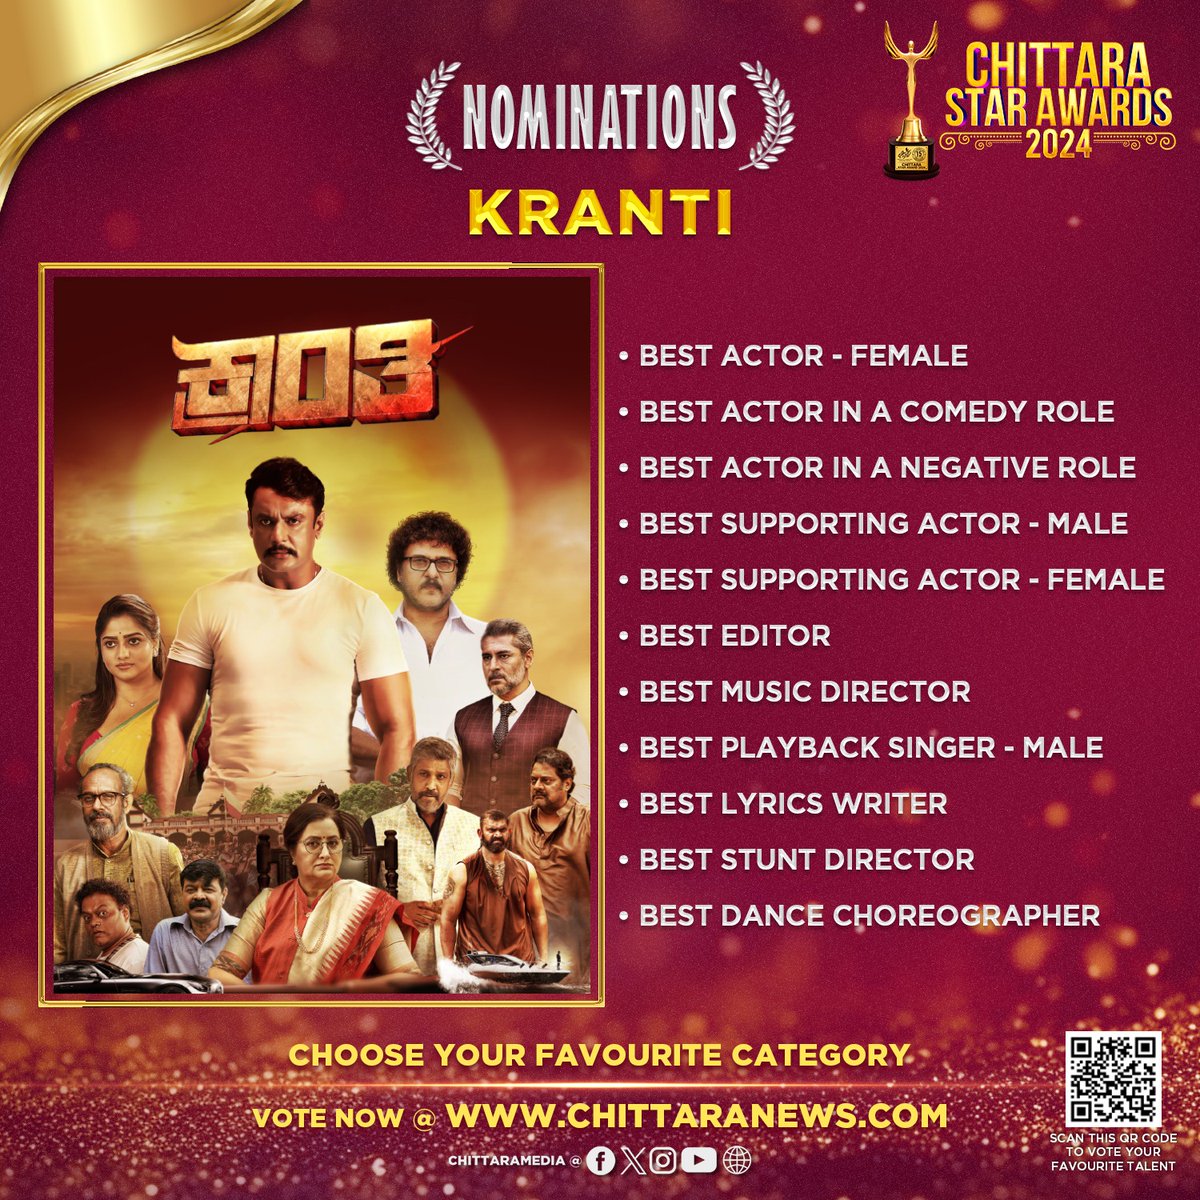 #Kranti 11 Nominations at #ChittaraStarAwards2024 ! Global Voting is Now Live : awards.chittaranews.com/poll/780/ Vote now and show your love for Team #Kranti #ChittaraStarAwards2024 #CSA2024 #ChittaraStarAwards